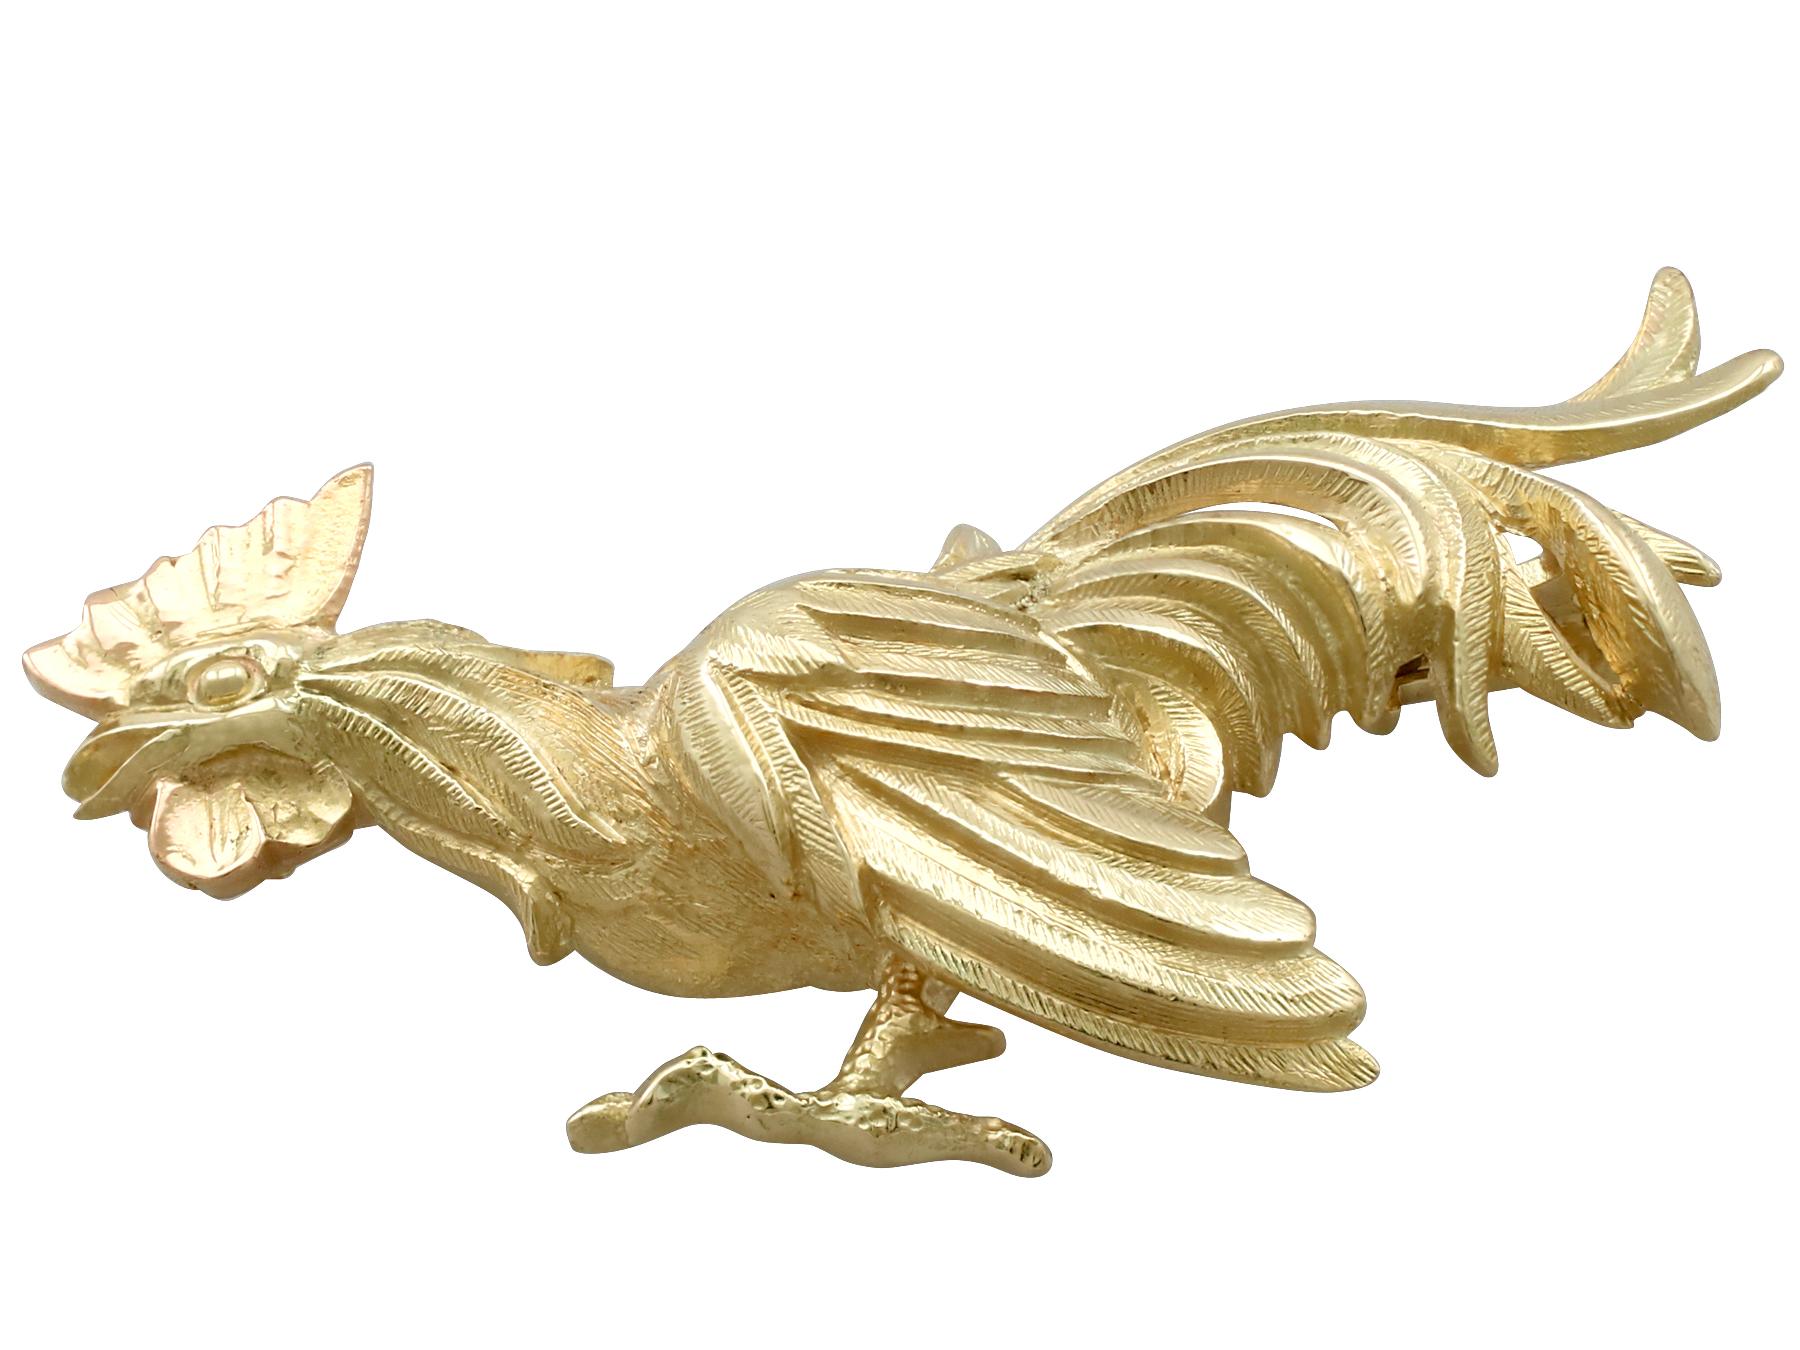 A fine and impressive 14 karat yellow gold brooch modelled in the form of a cockerel; part of our diverse antique jewellery and estate jewelry collections.

This fine and impressive antique cockerel brooch has been crafted in 14k yellow gold.

The